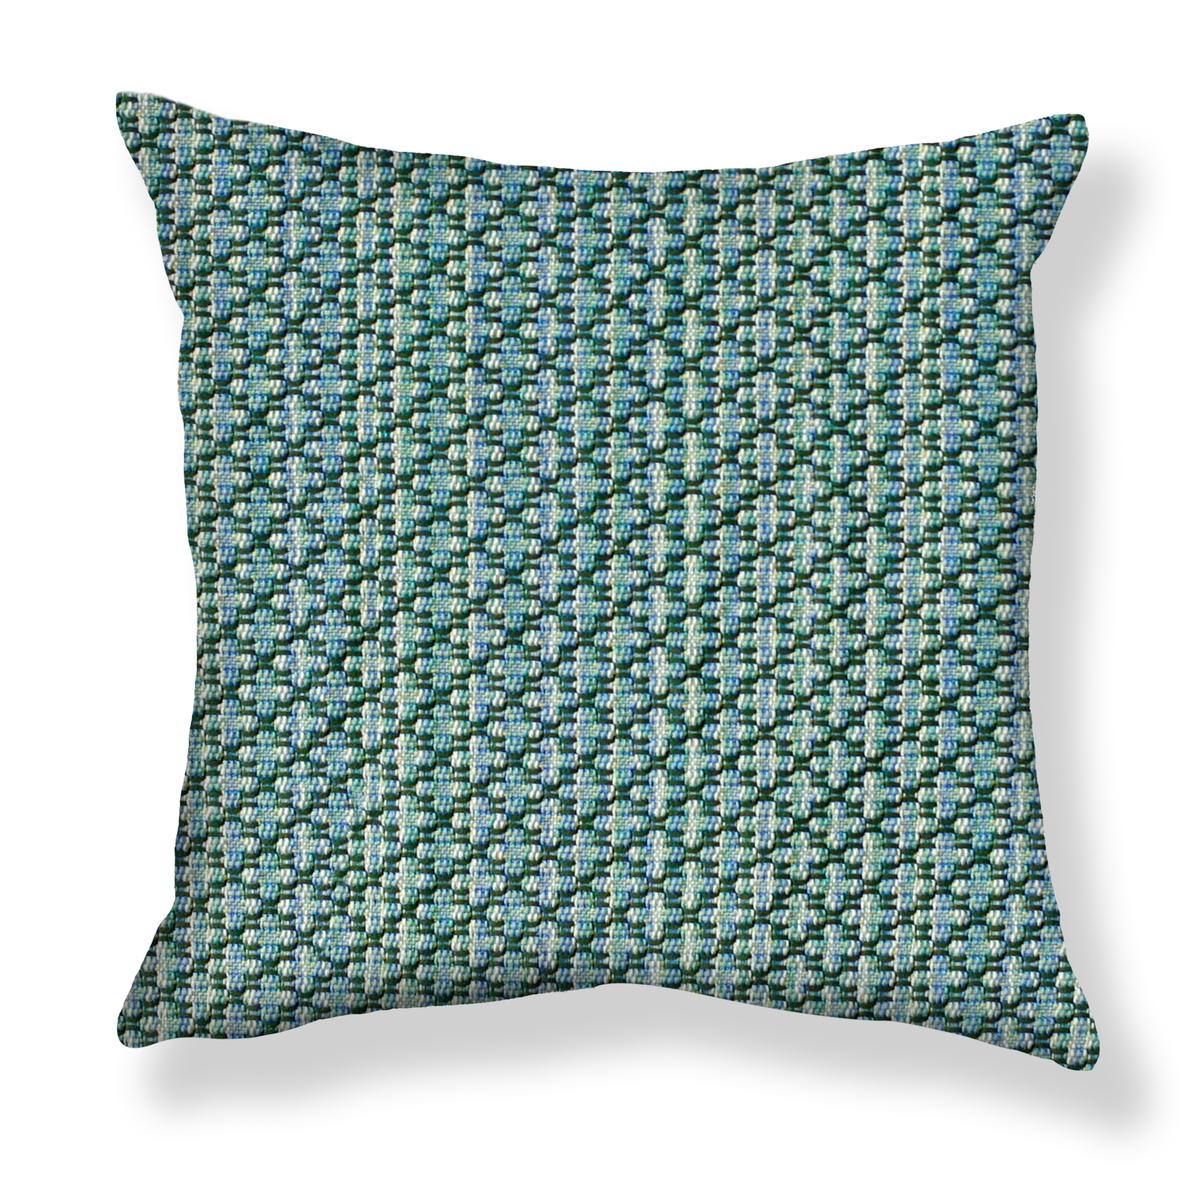 Arbor Pillow in Green-Blue